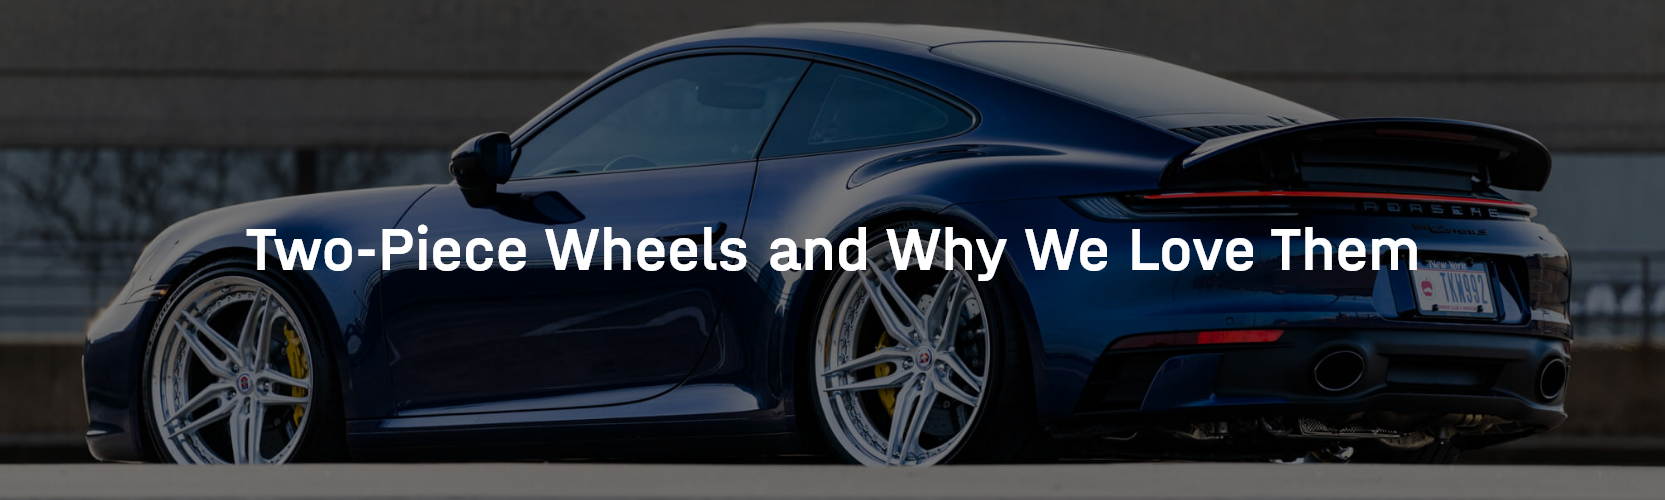 Two-Piece Wheels and Why We Love Them